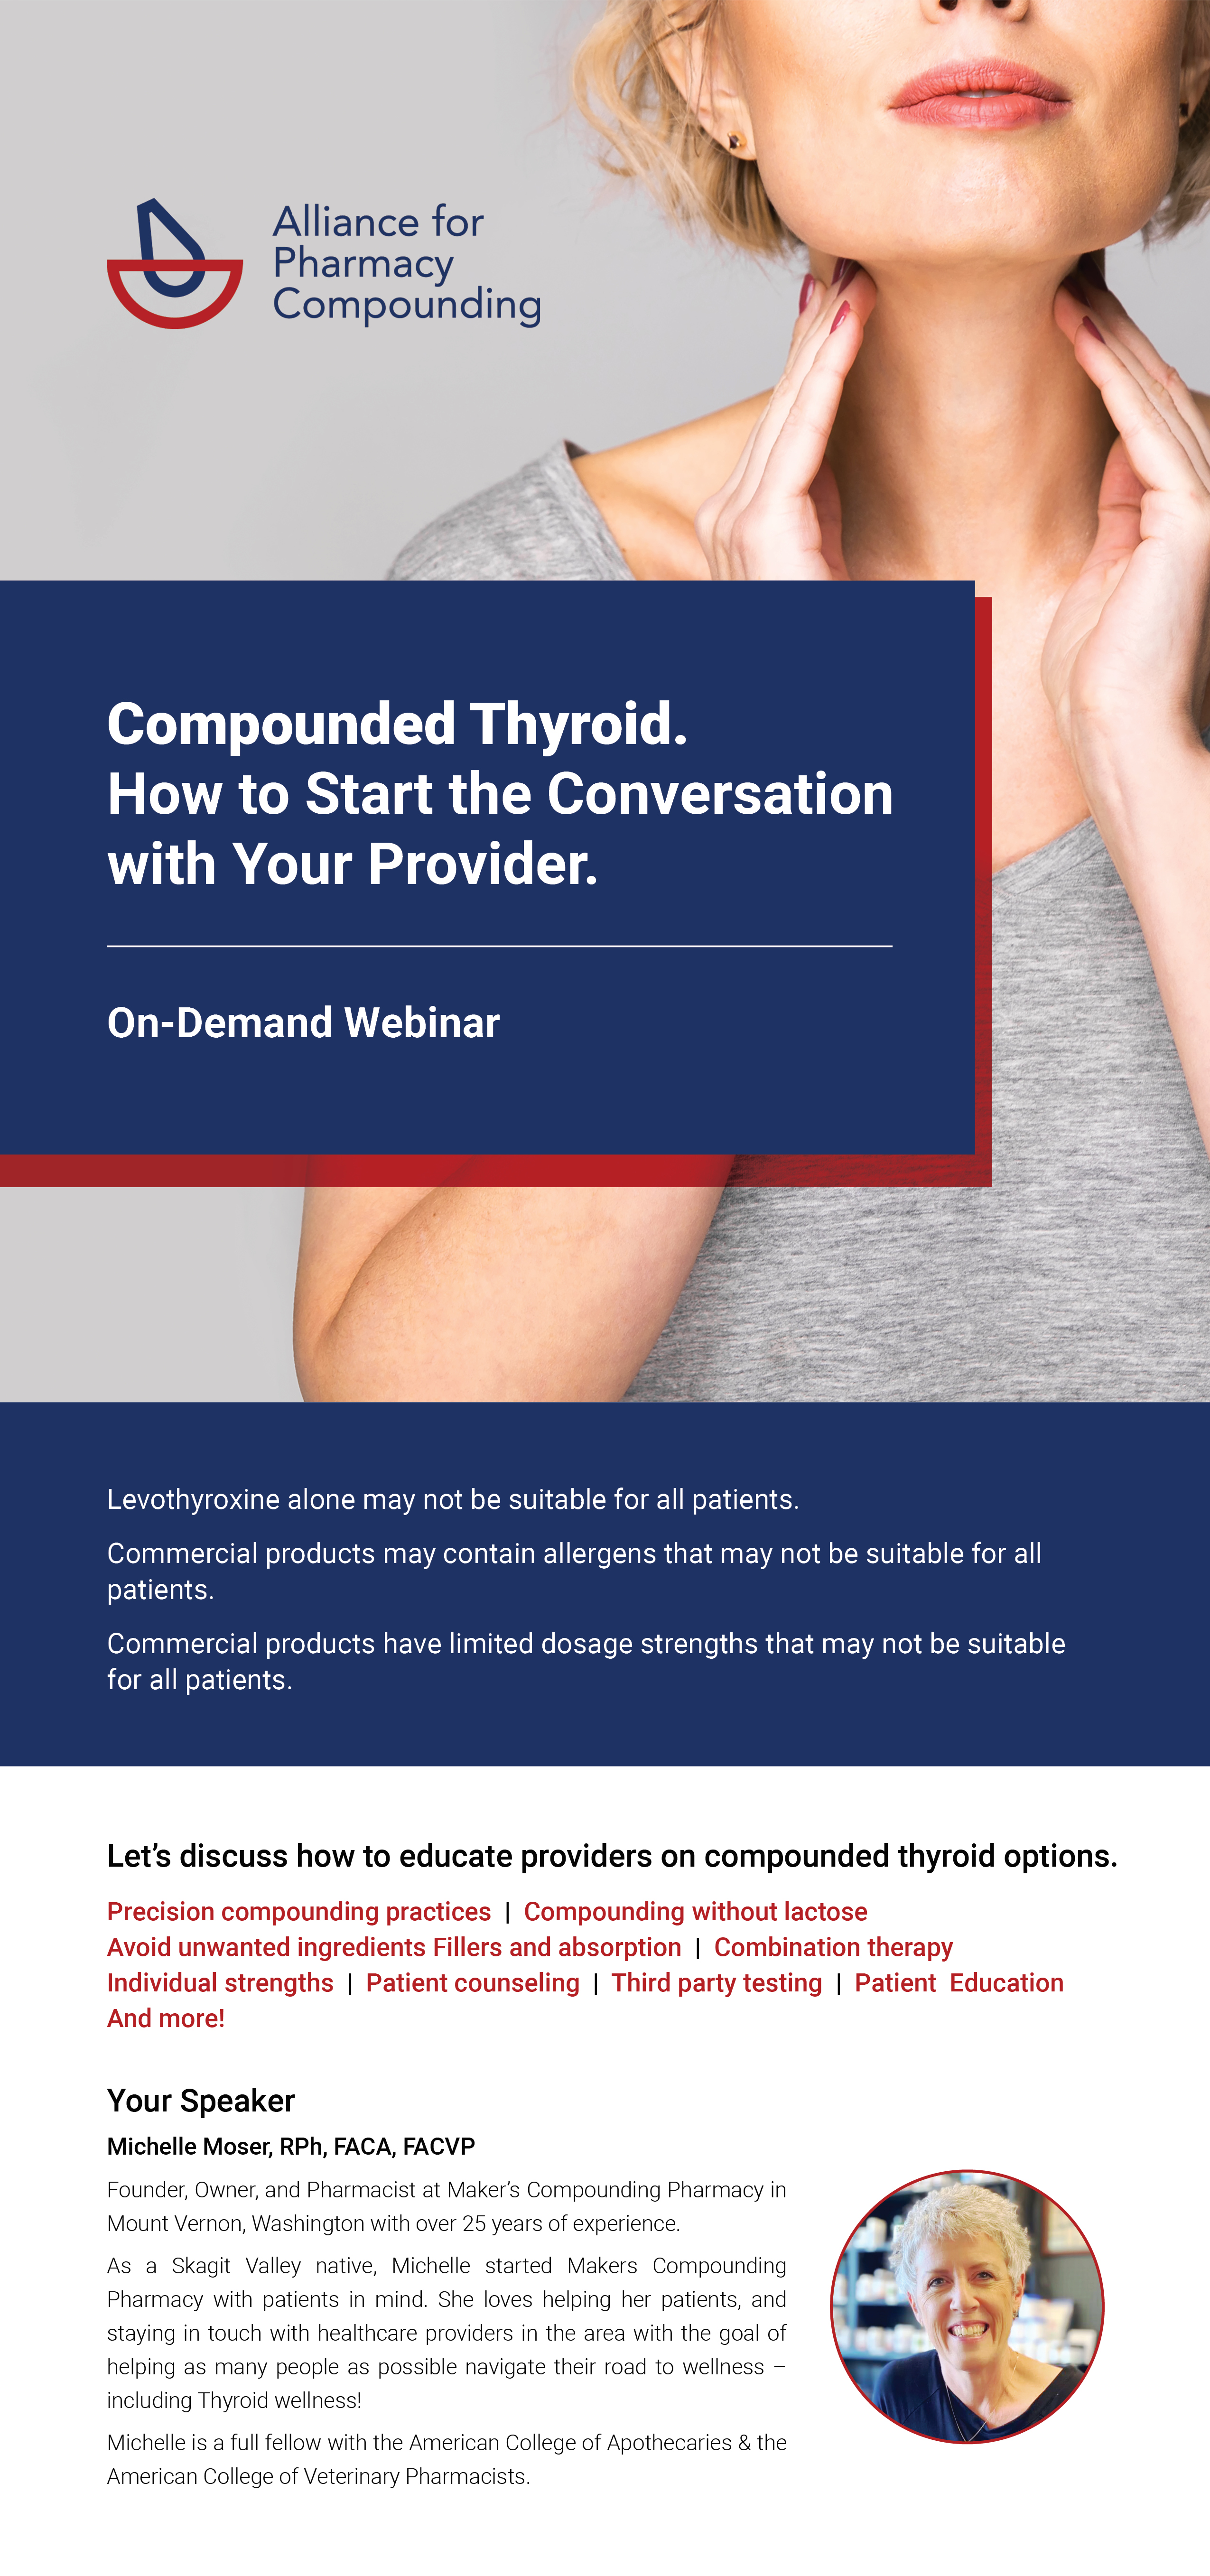 Alliance for Pharmacy Compounding LP3 Network Compounded Thyroid Webinar How to Start the Conversation with Your Provider